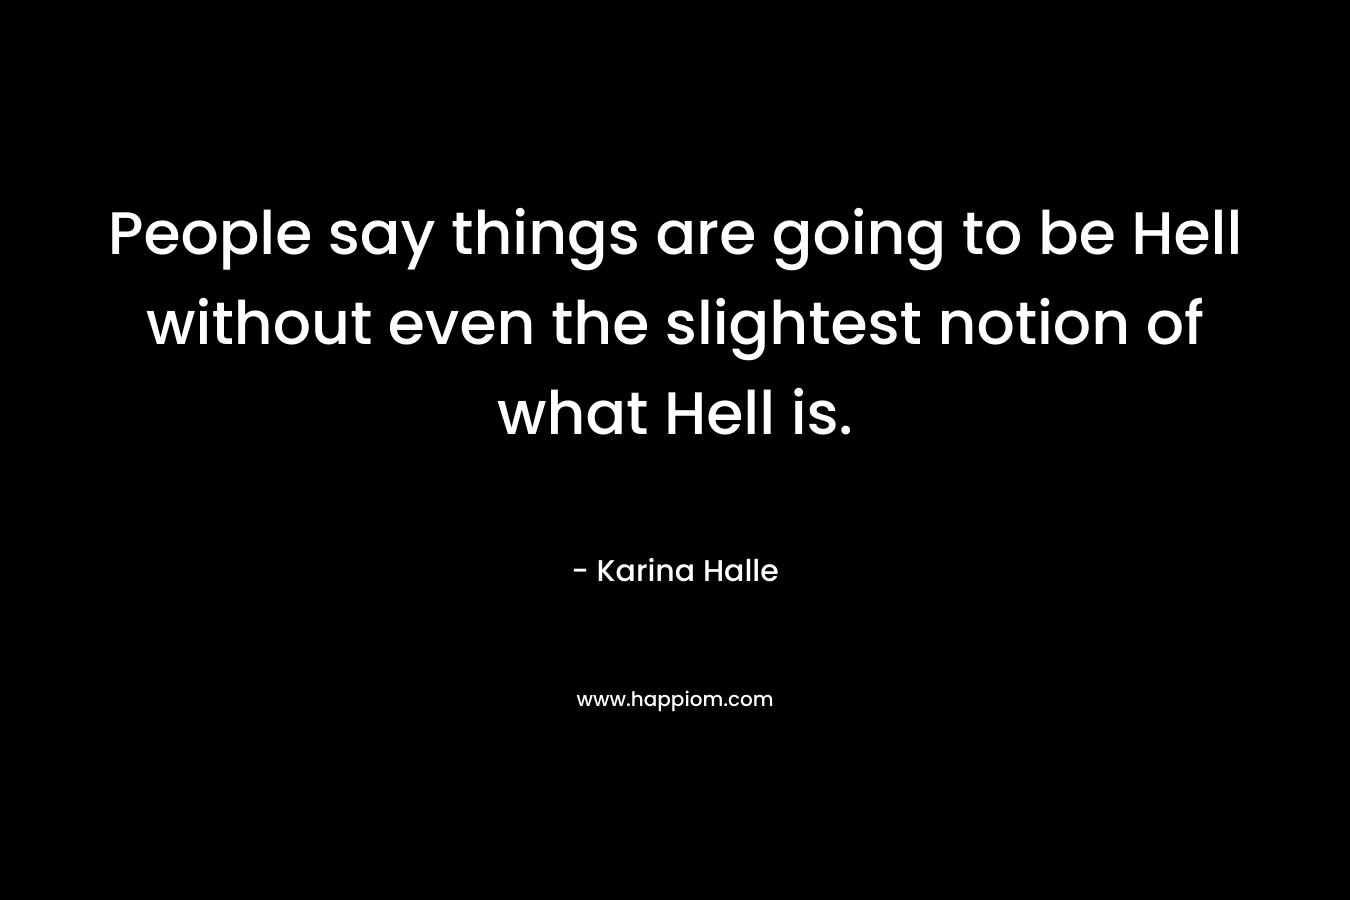 People say things are going to be Hell without even the slightest notion of what Hell is. – Karina Halle